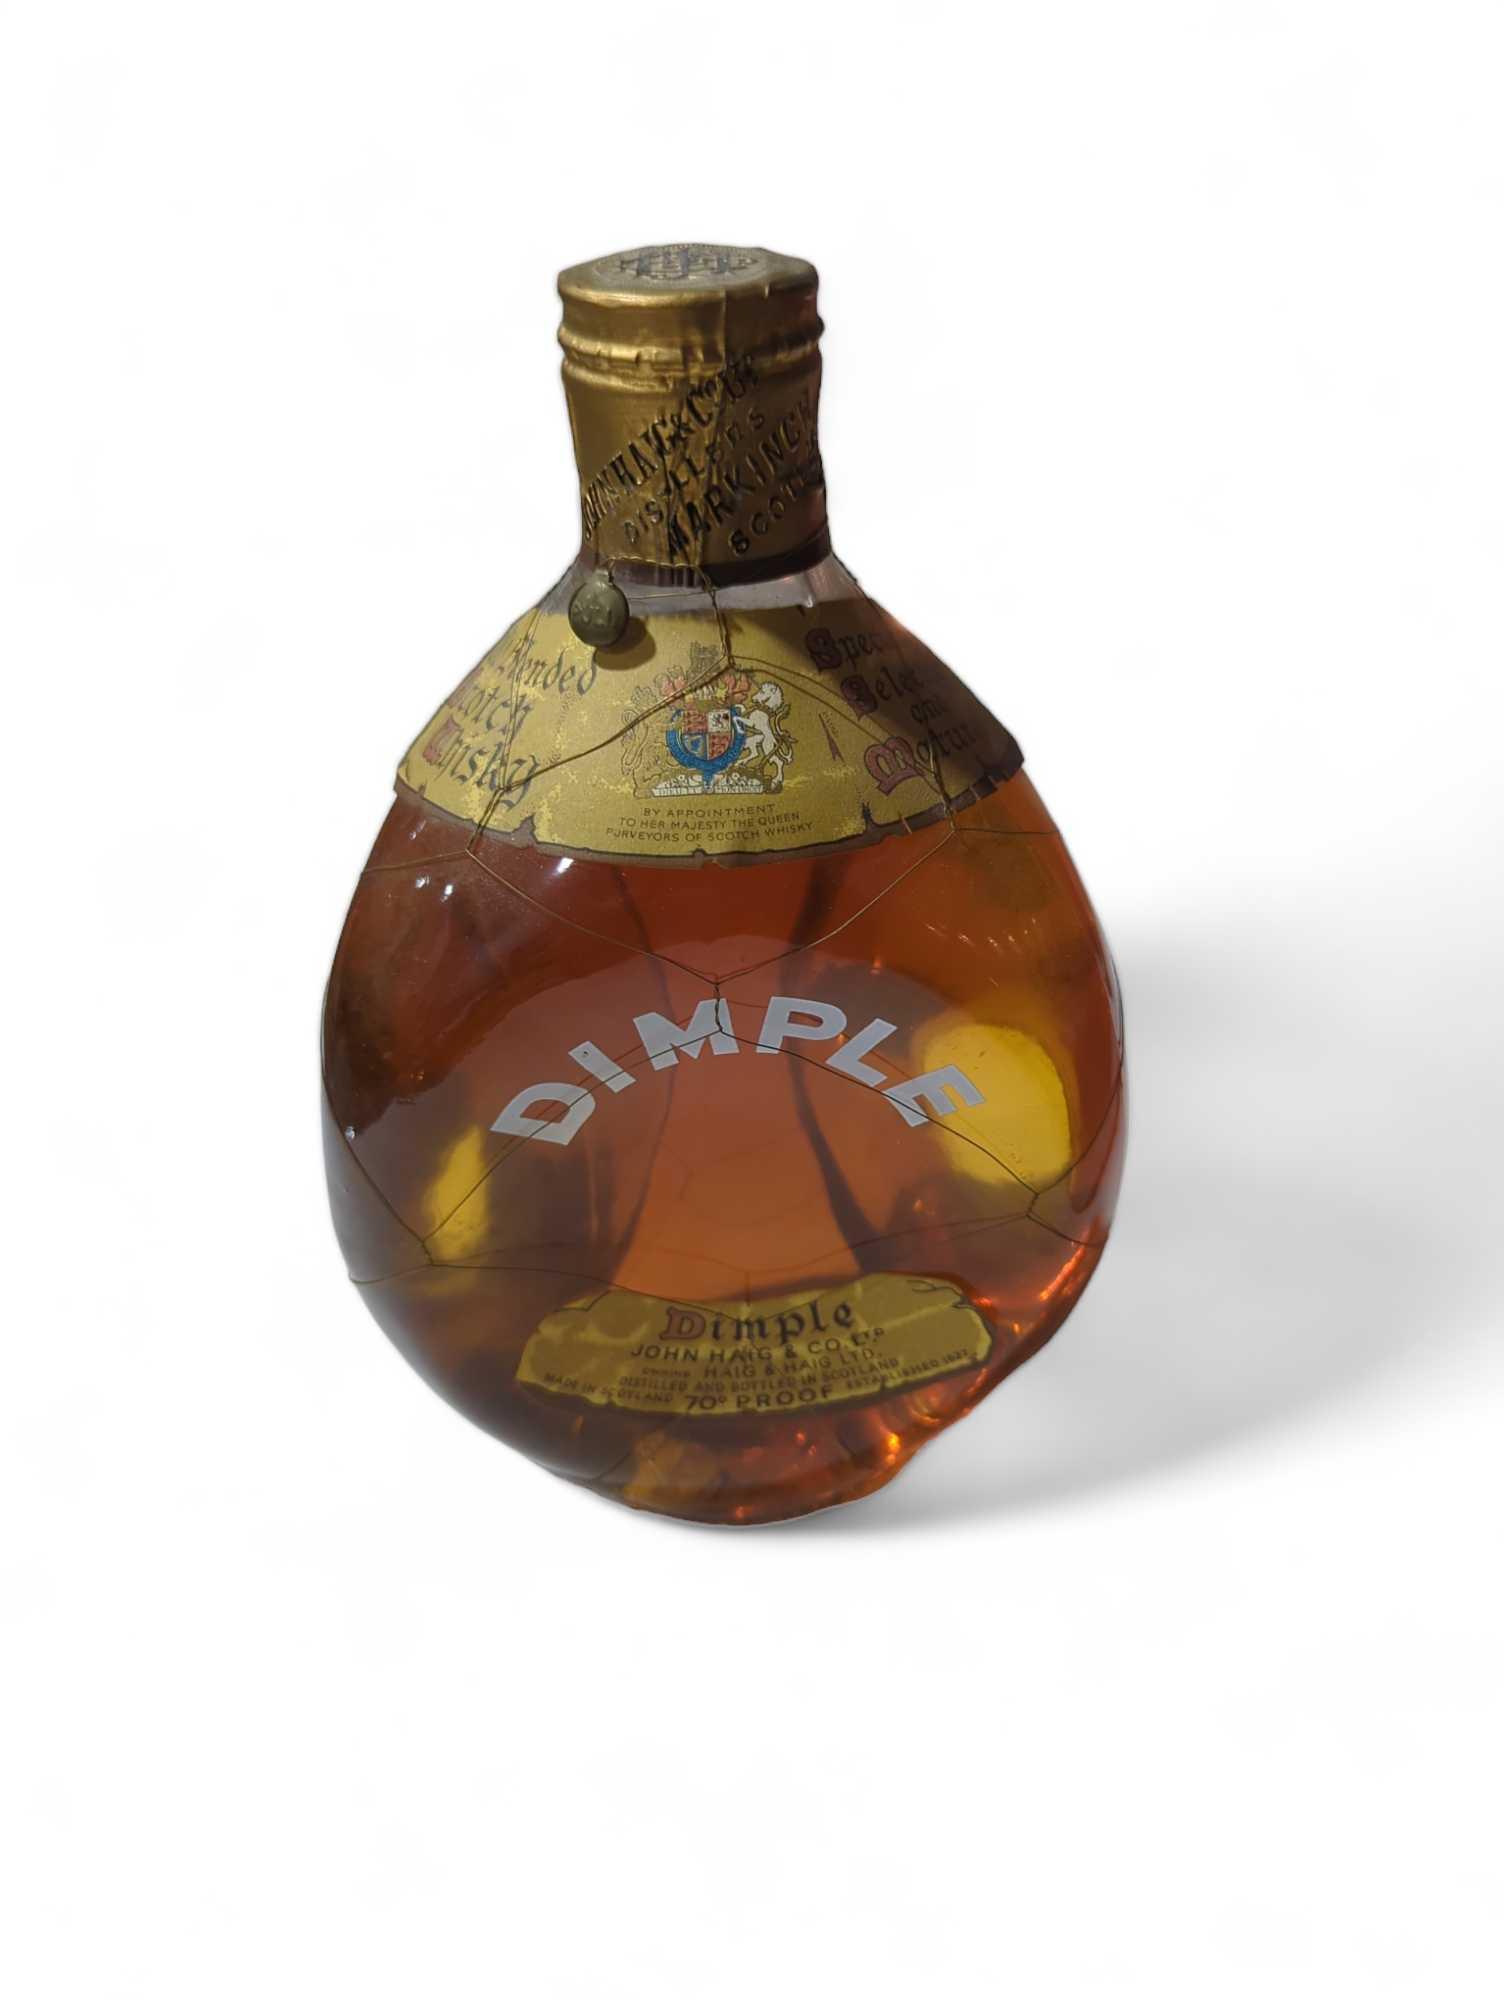 A bottle of Dimple scotch whisky